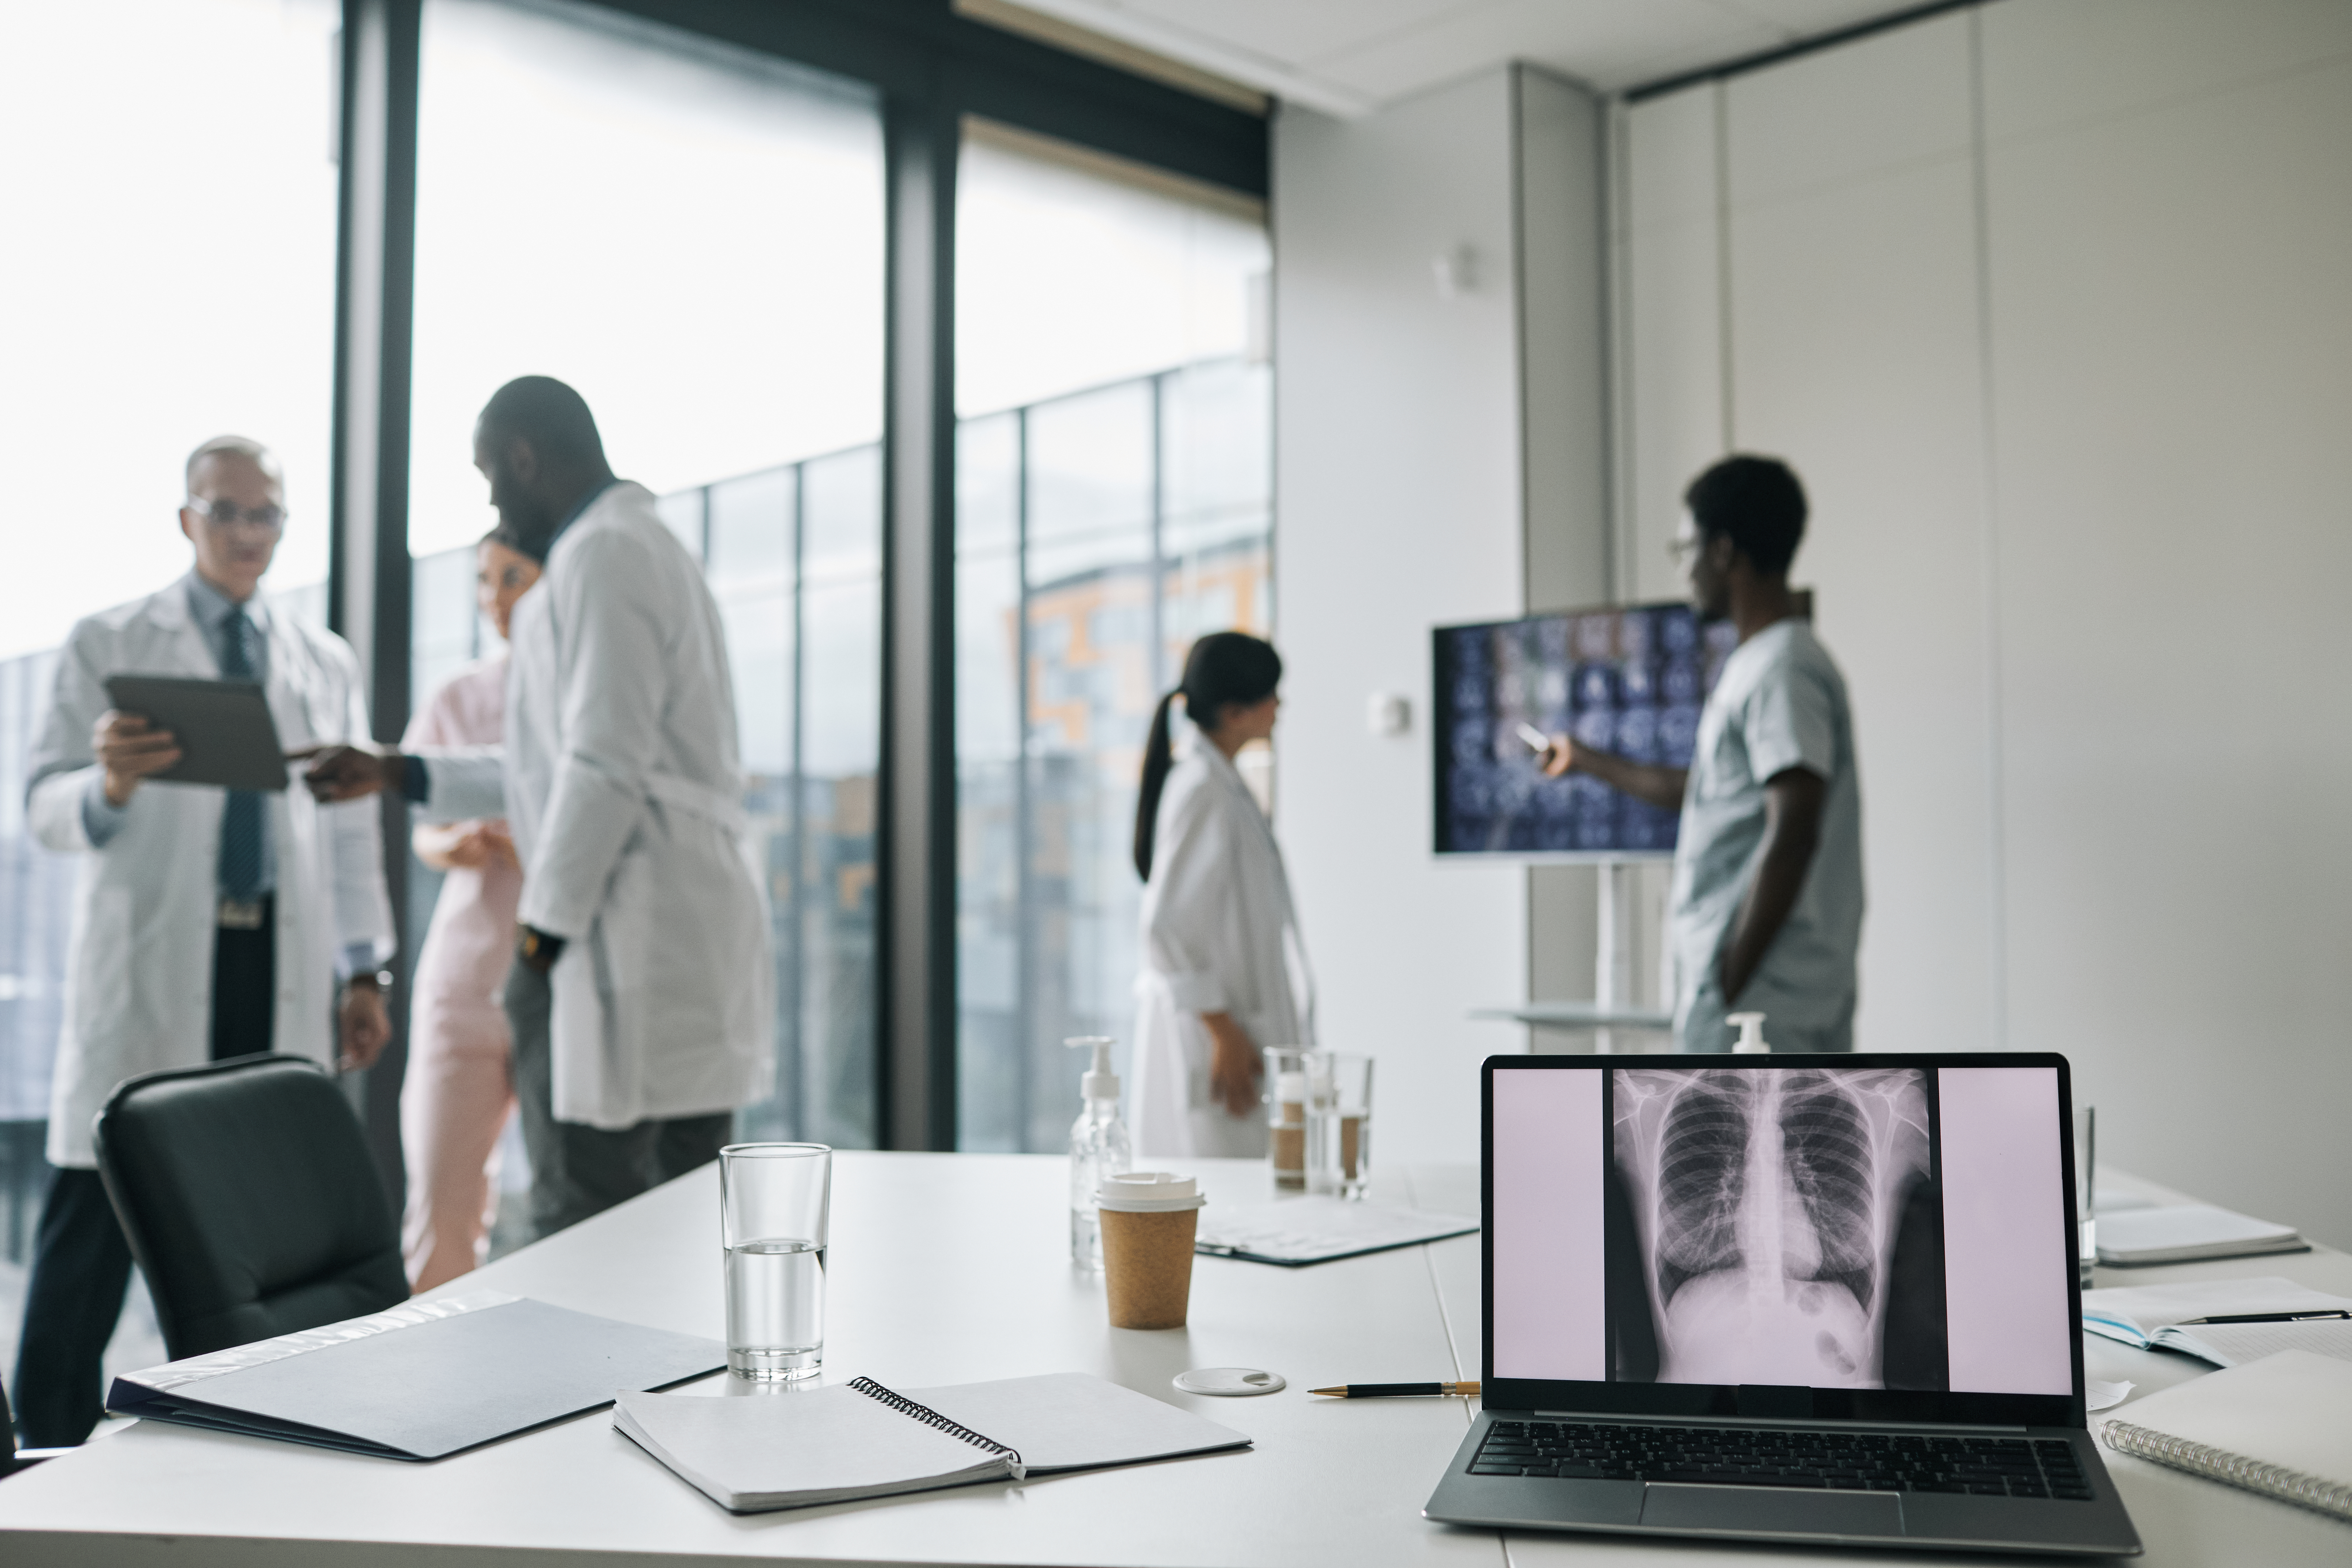 Medical imaging on laptop screen with healthcare workers in background